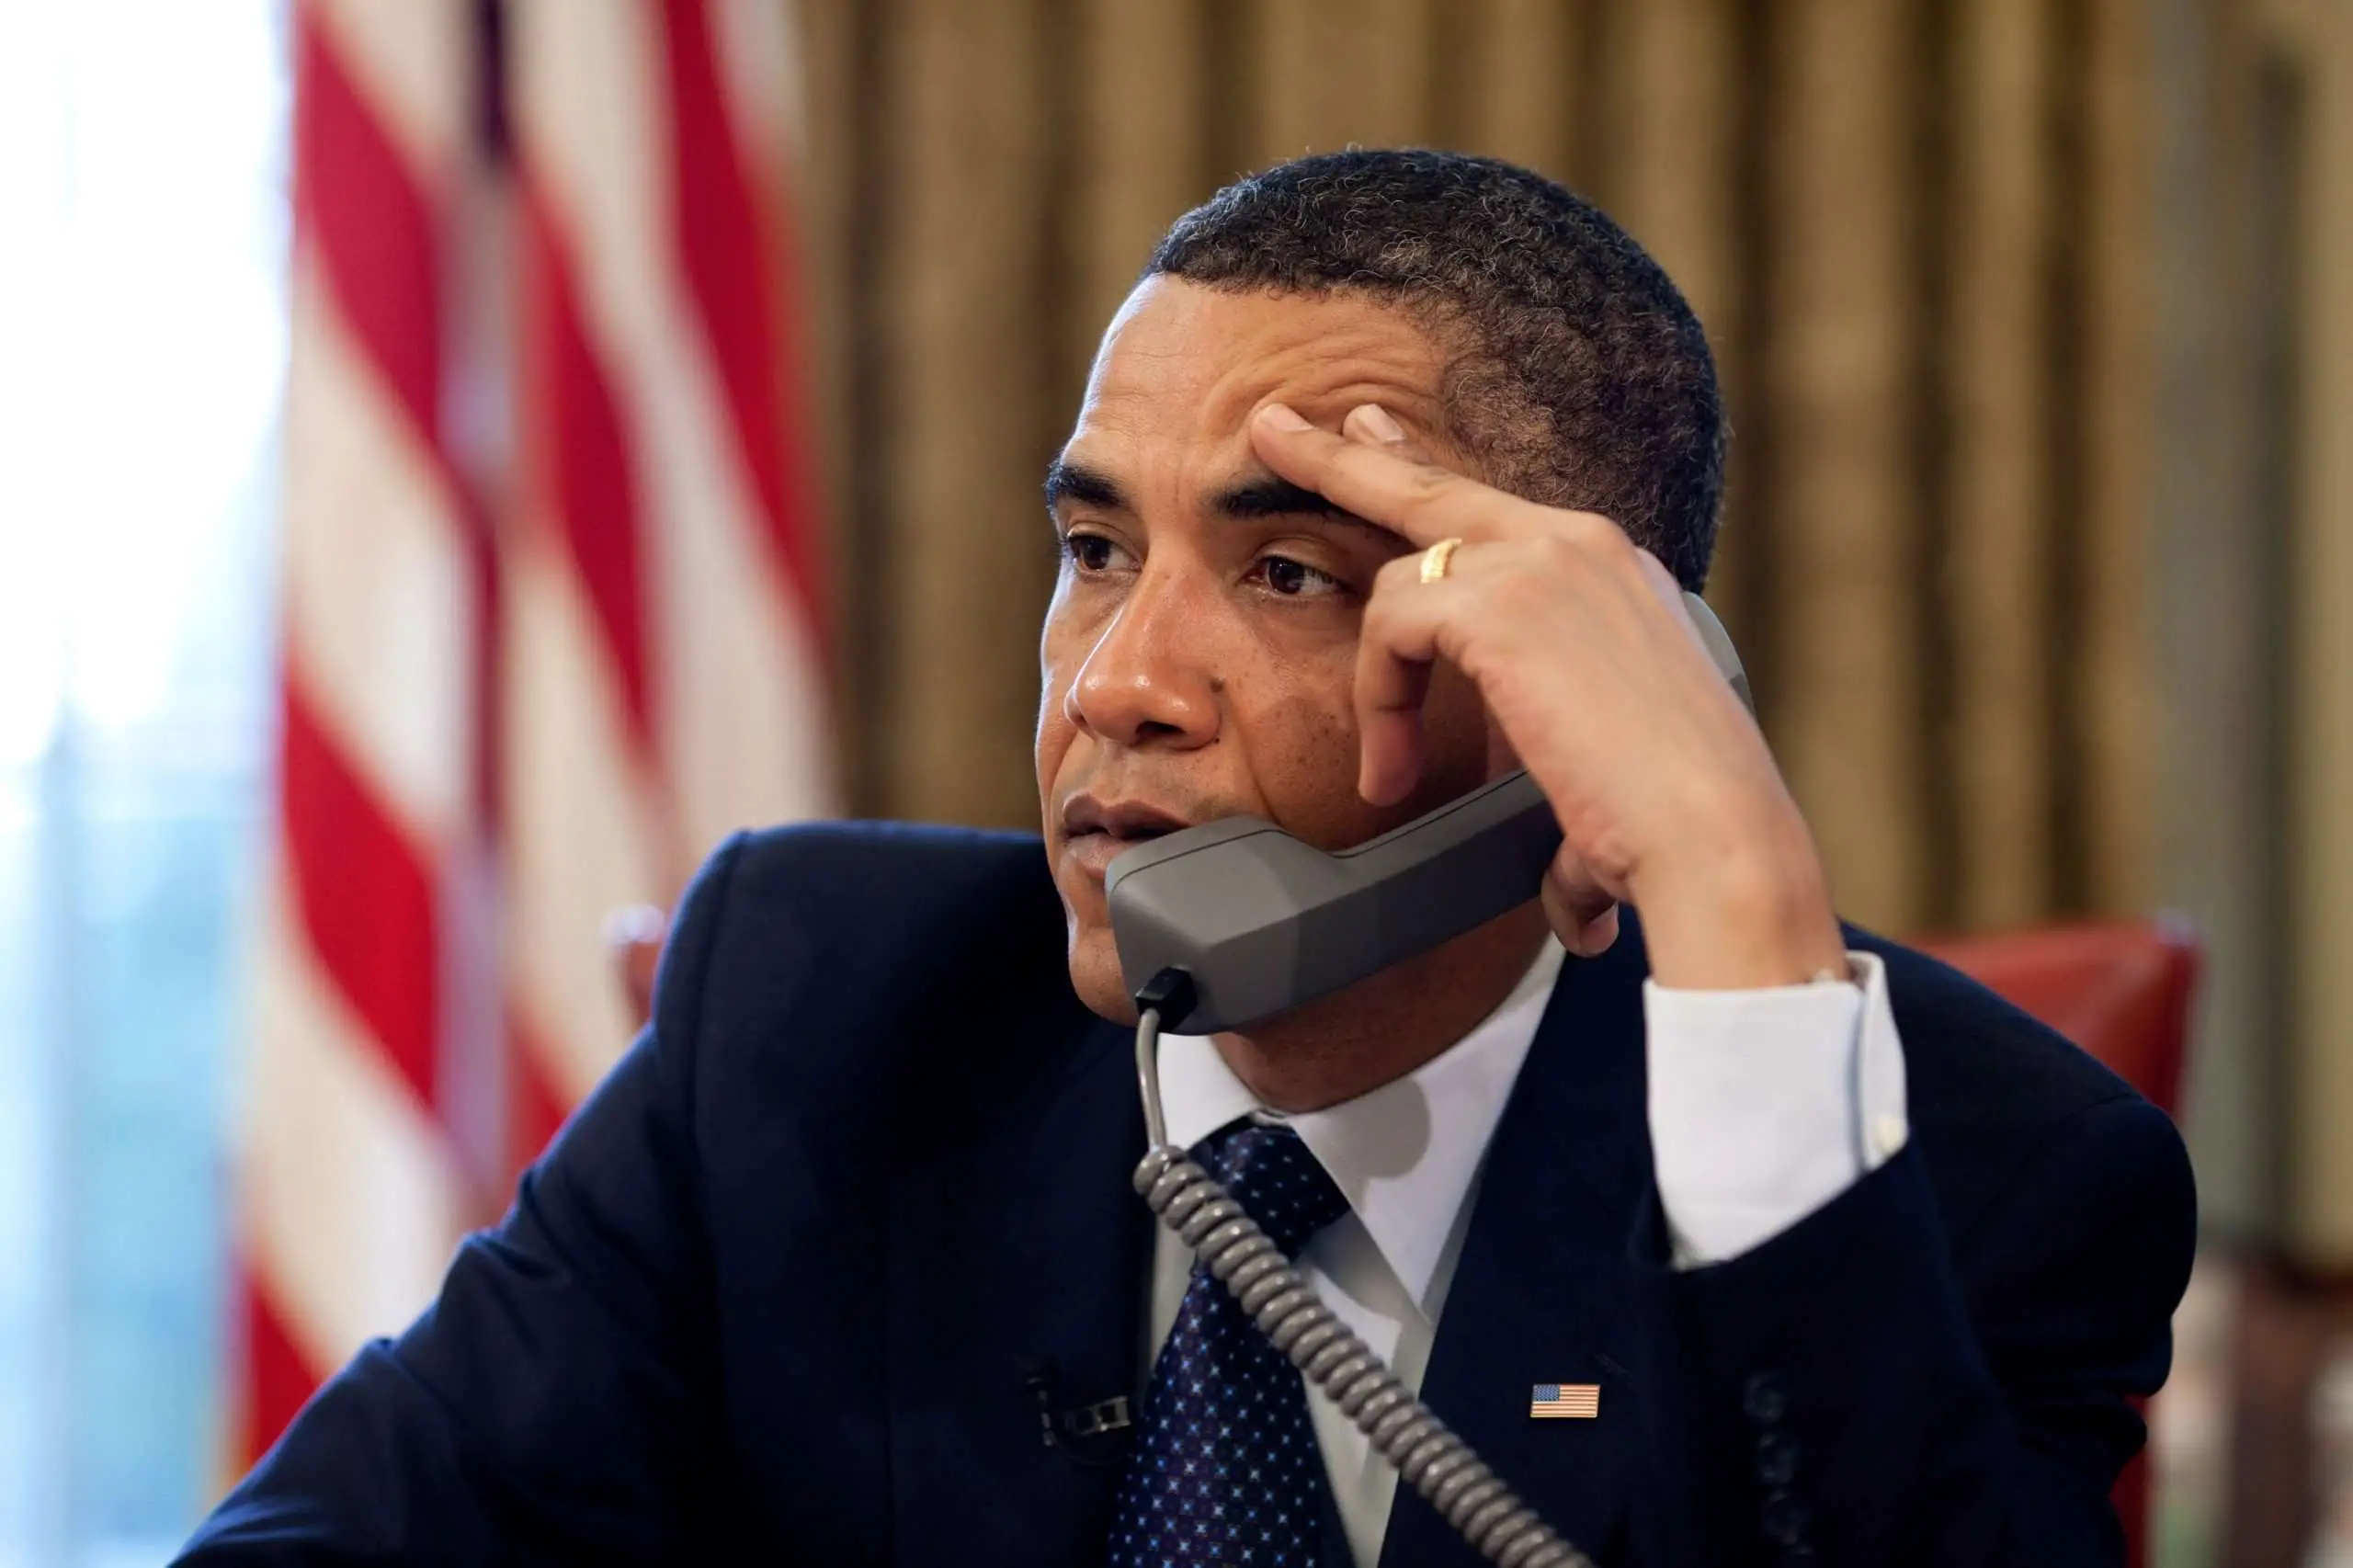 Barack Obama talking on the phone in the White House